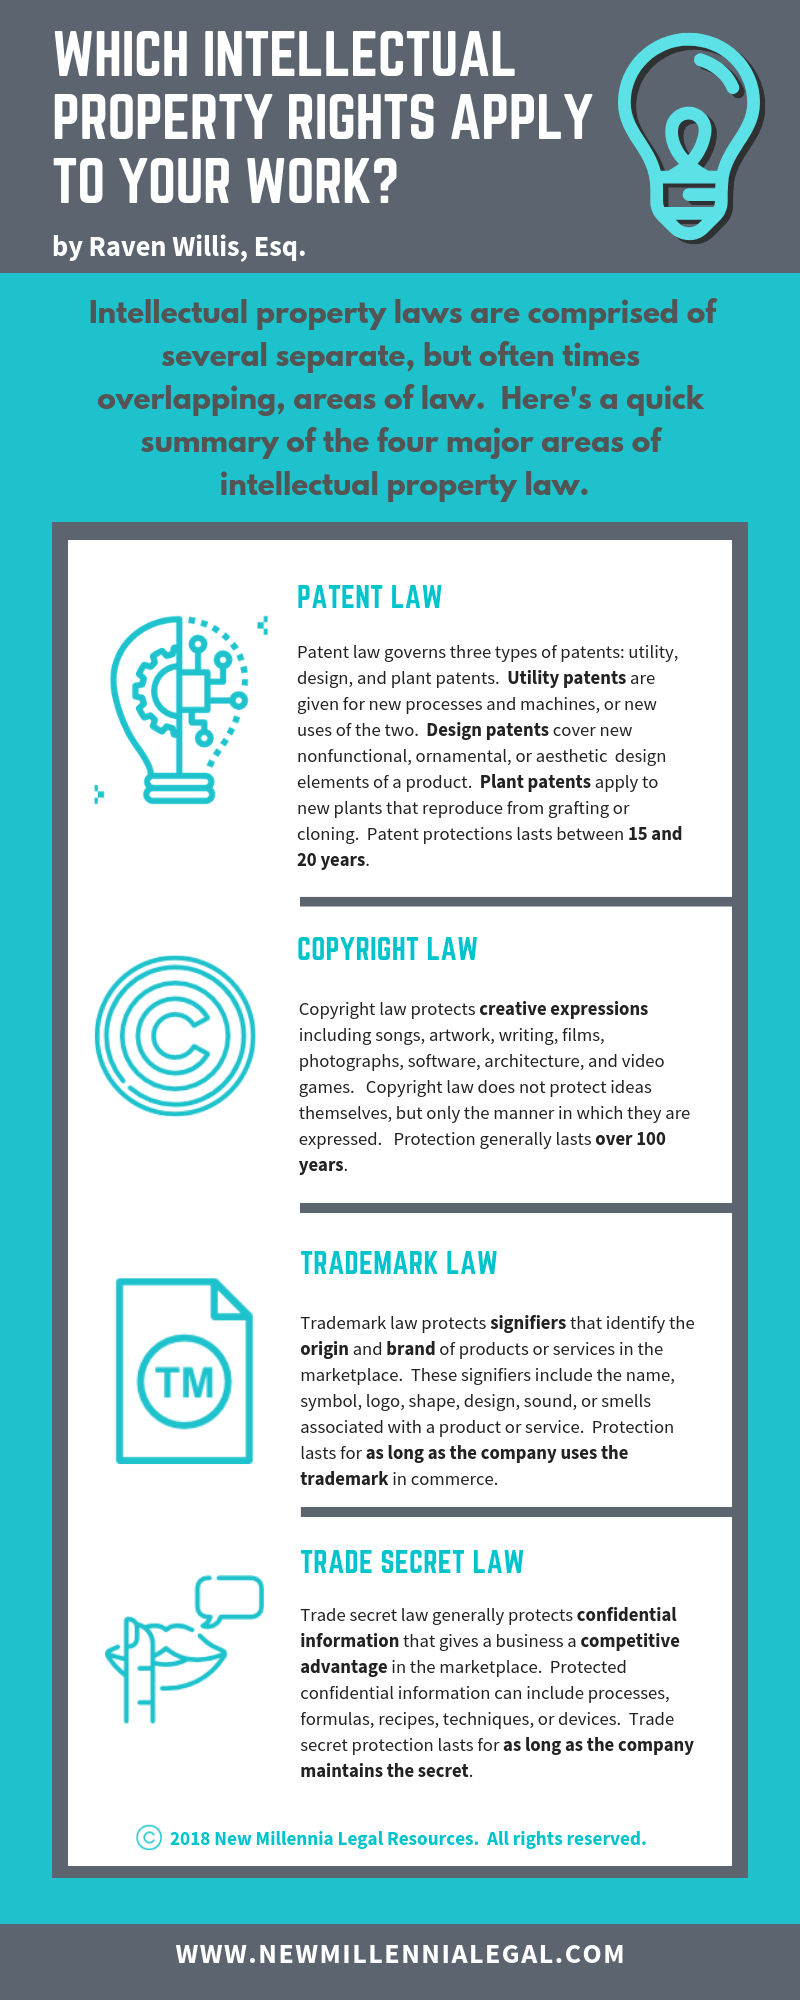 Copyrights, Trademarks, and Patents Summary